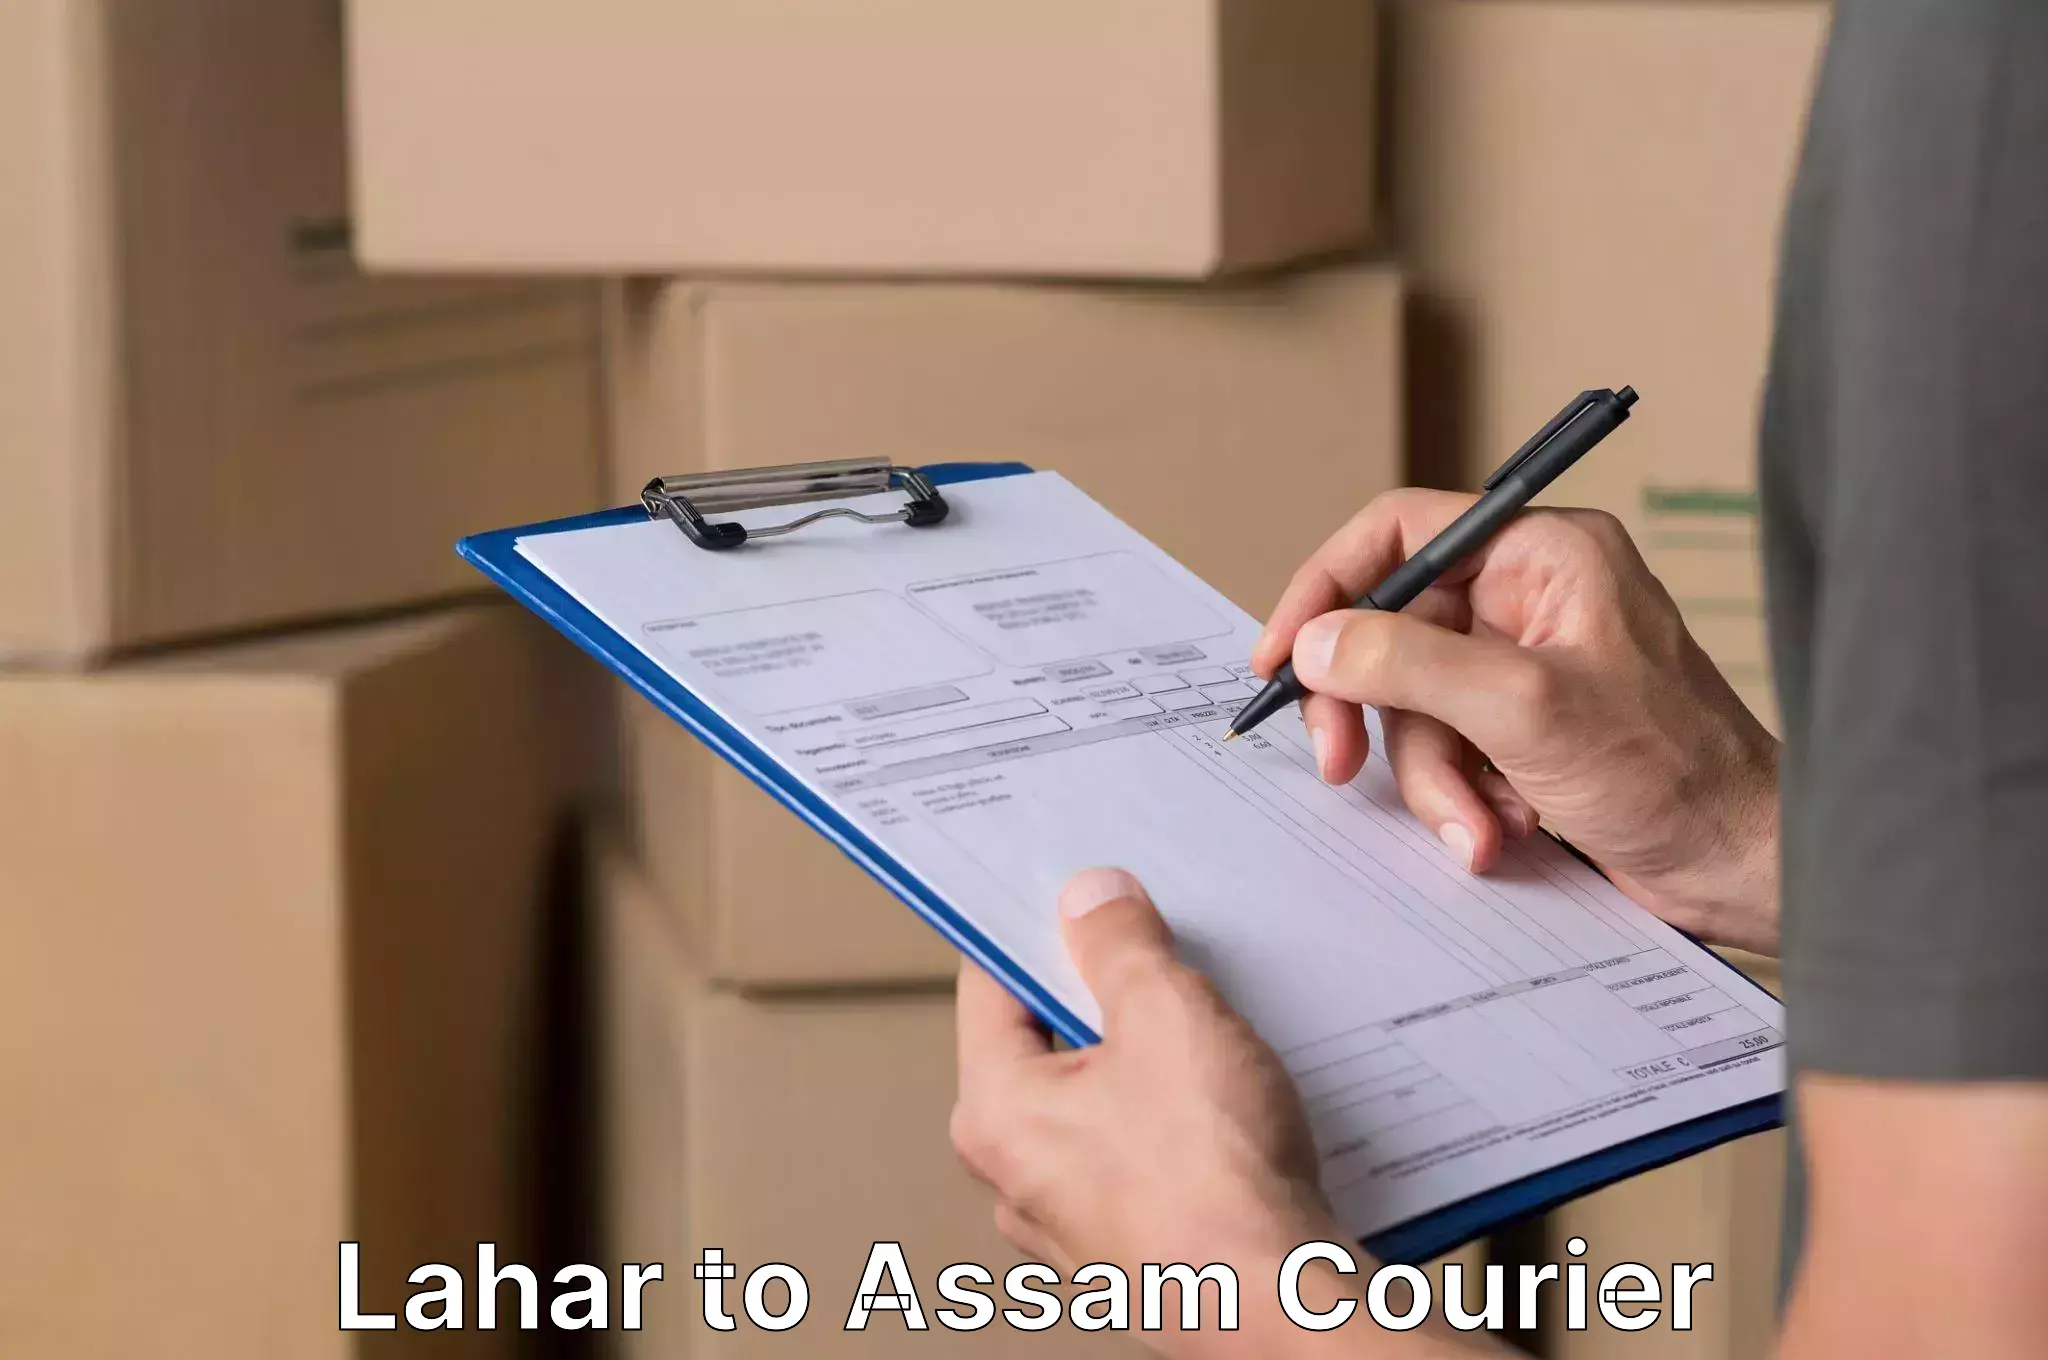 Personalized moving service Lahar to Assam